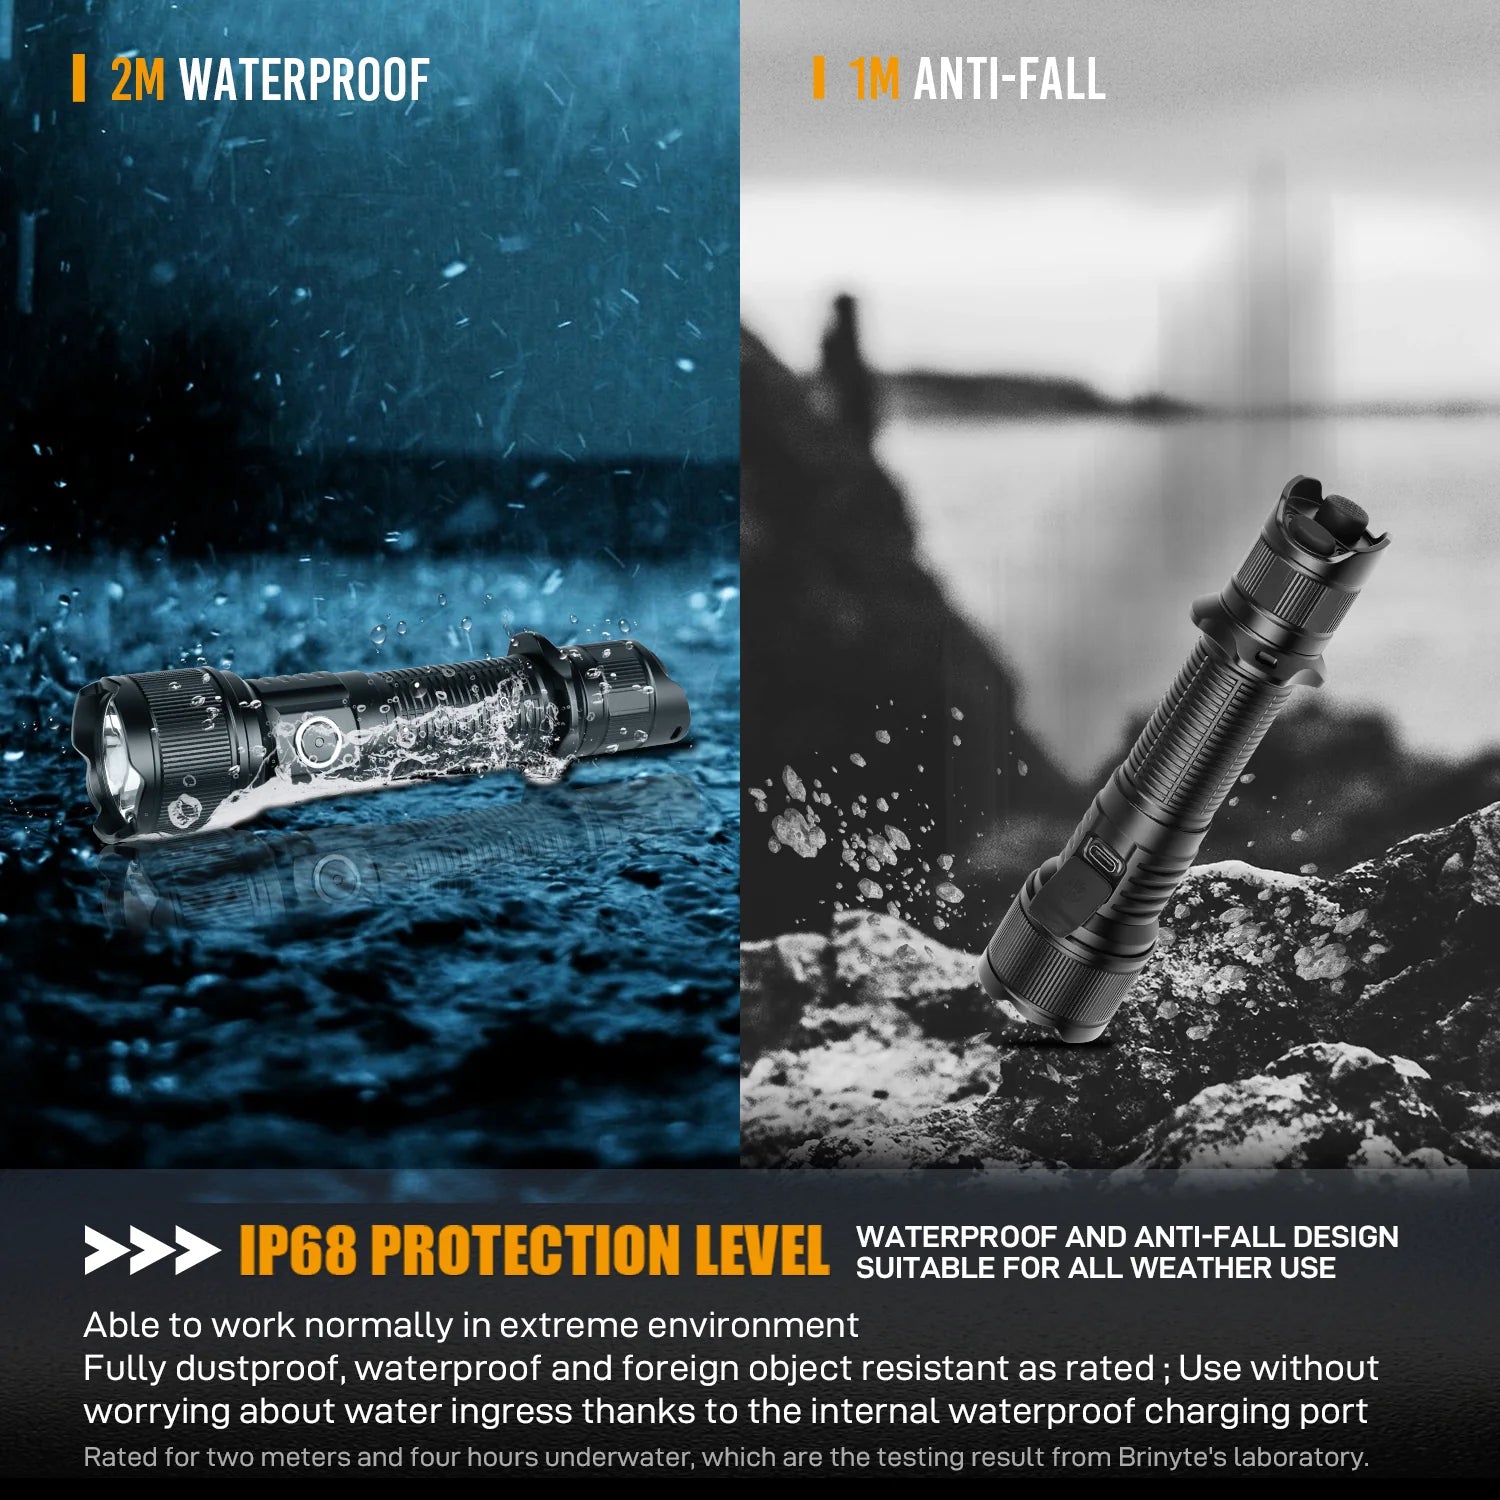 Weaponlight: A powerful weapon for modern warfare and self-defense